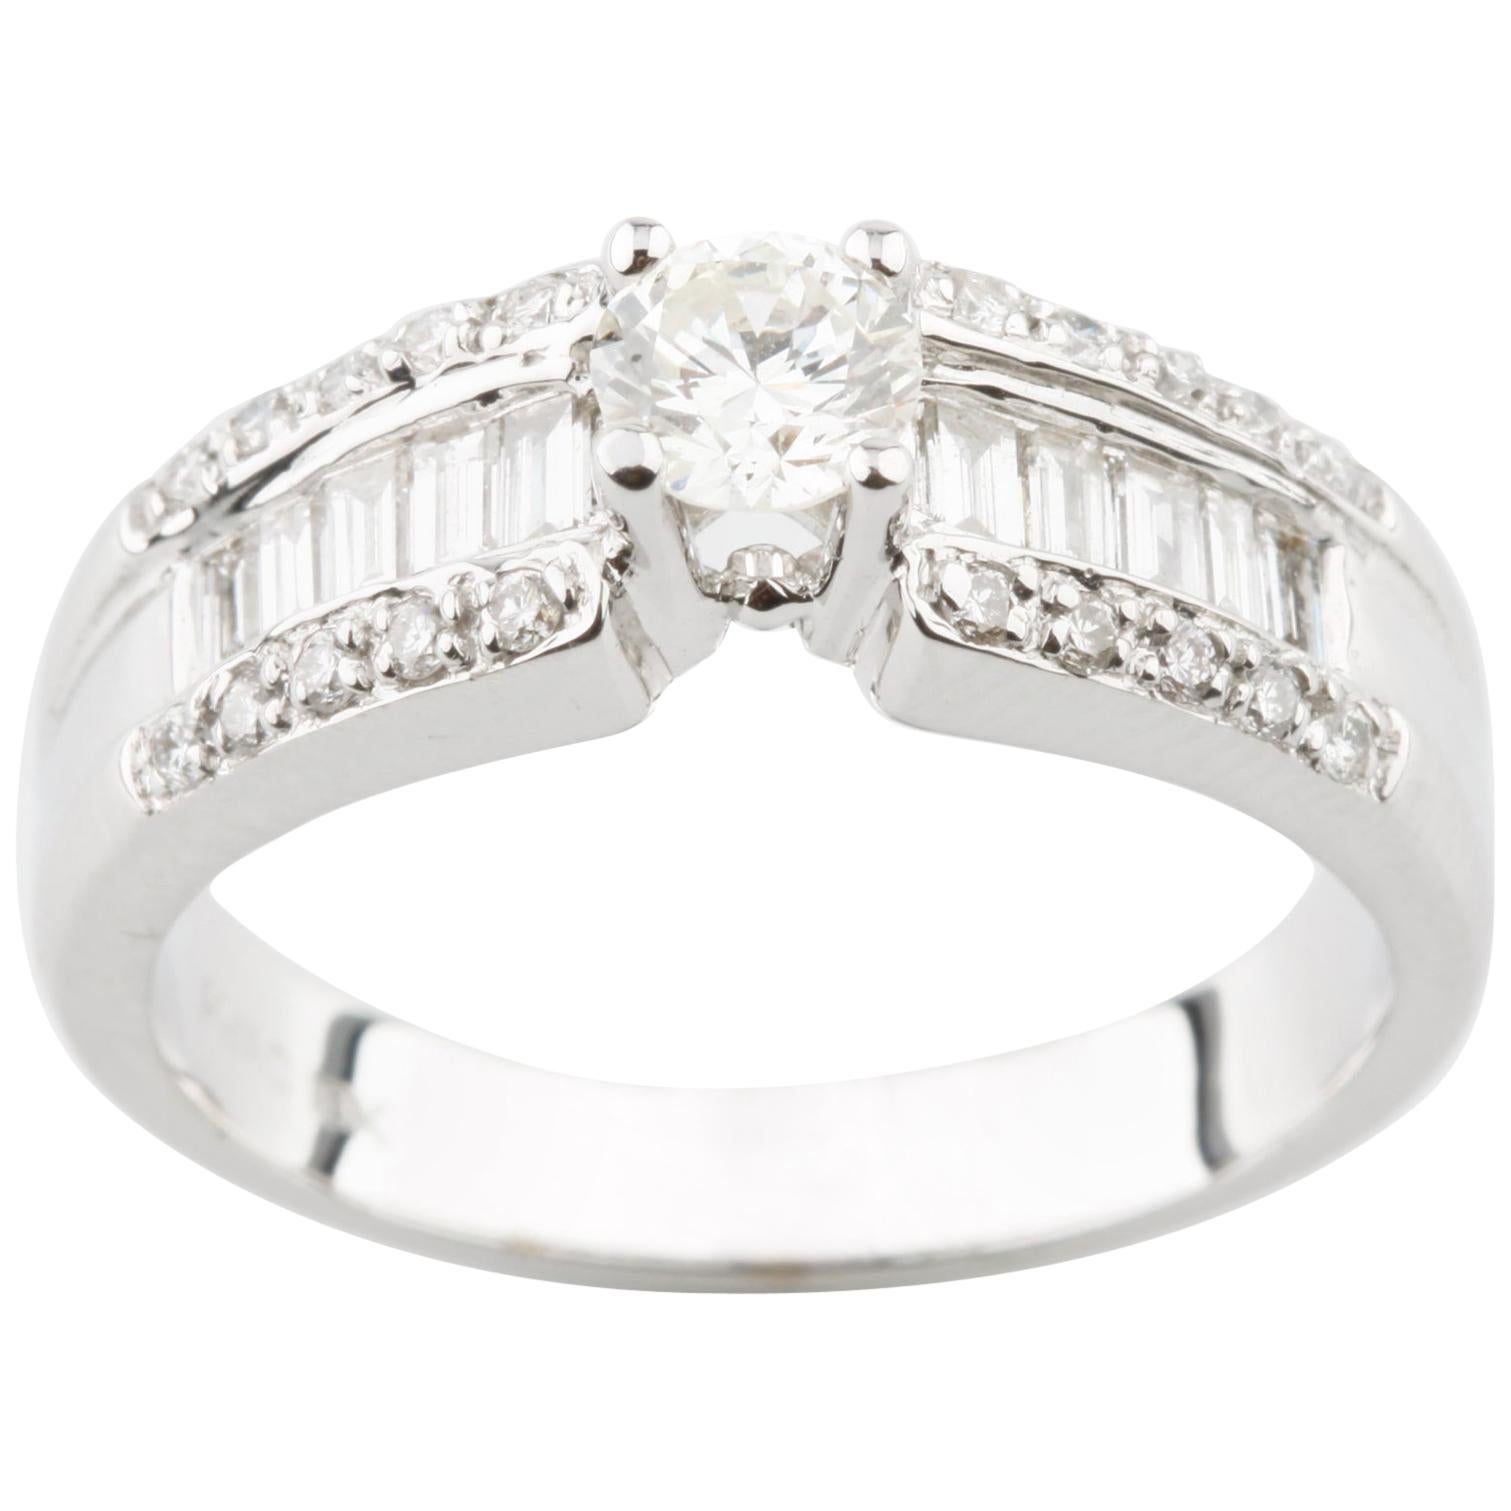 0.37 Carat Round Diamond Solitaire Ring in White Gold with Accents